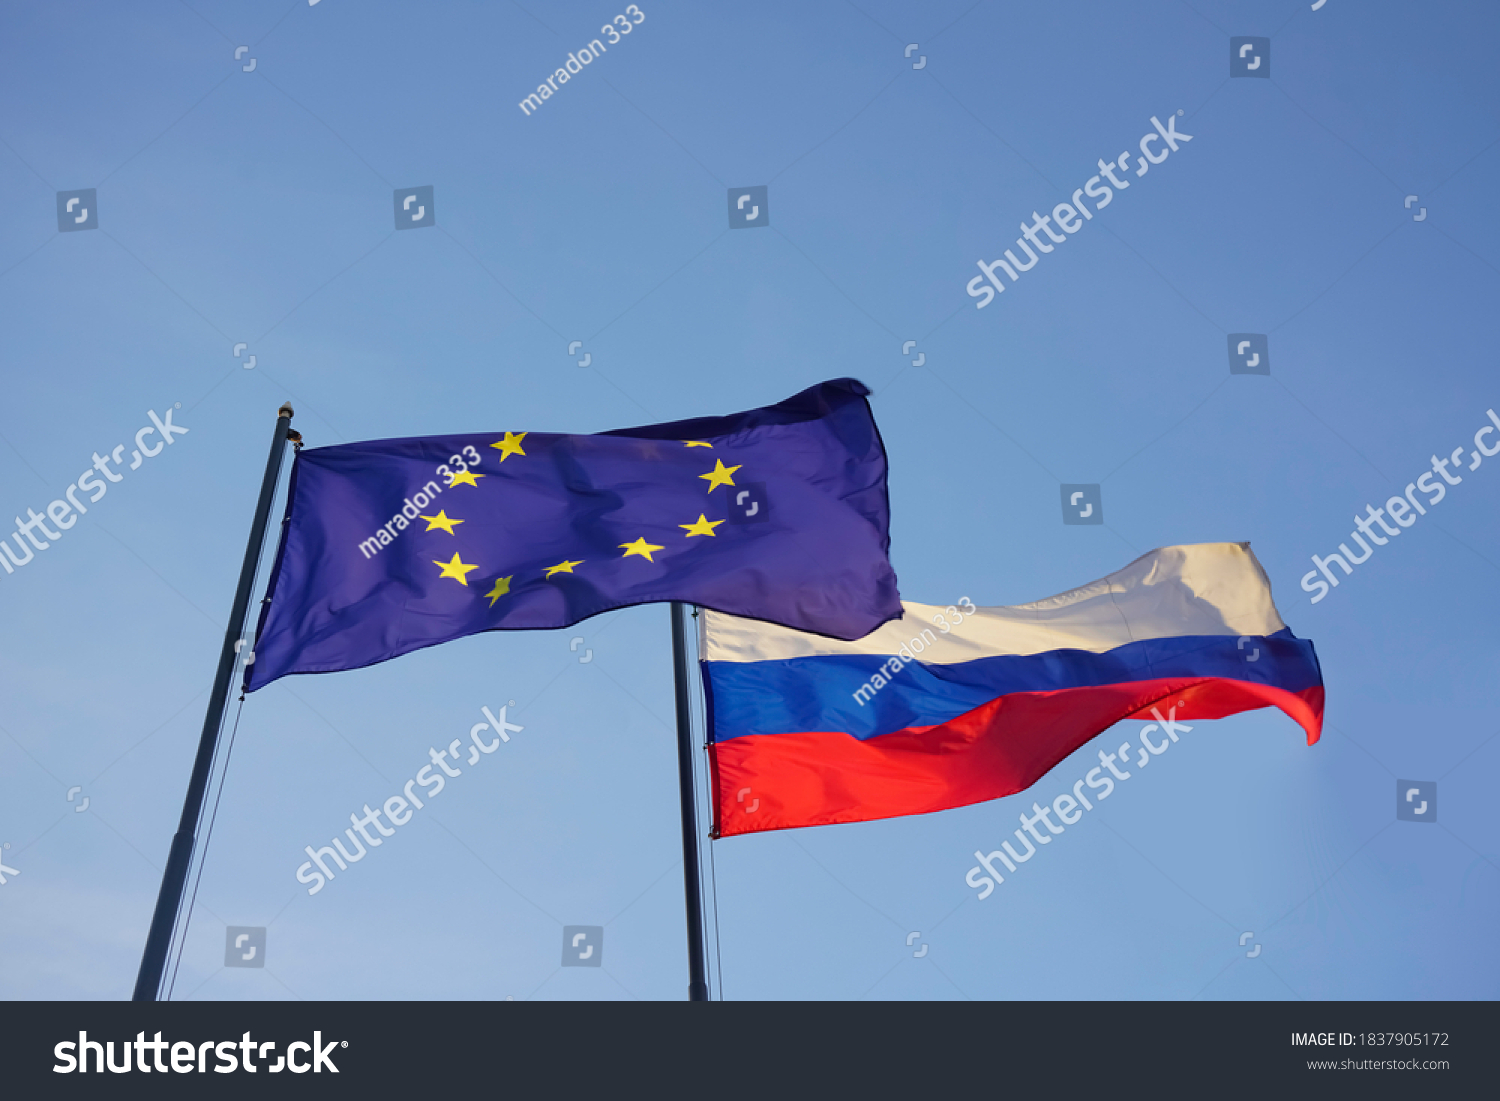 European Union -  EU -  and Russian Federation flags on background of blue sky. Europa and Russia.  #1837905172